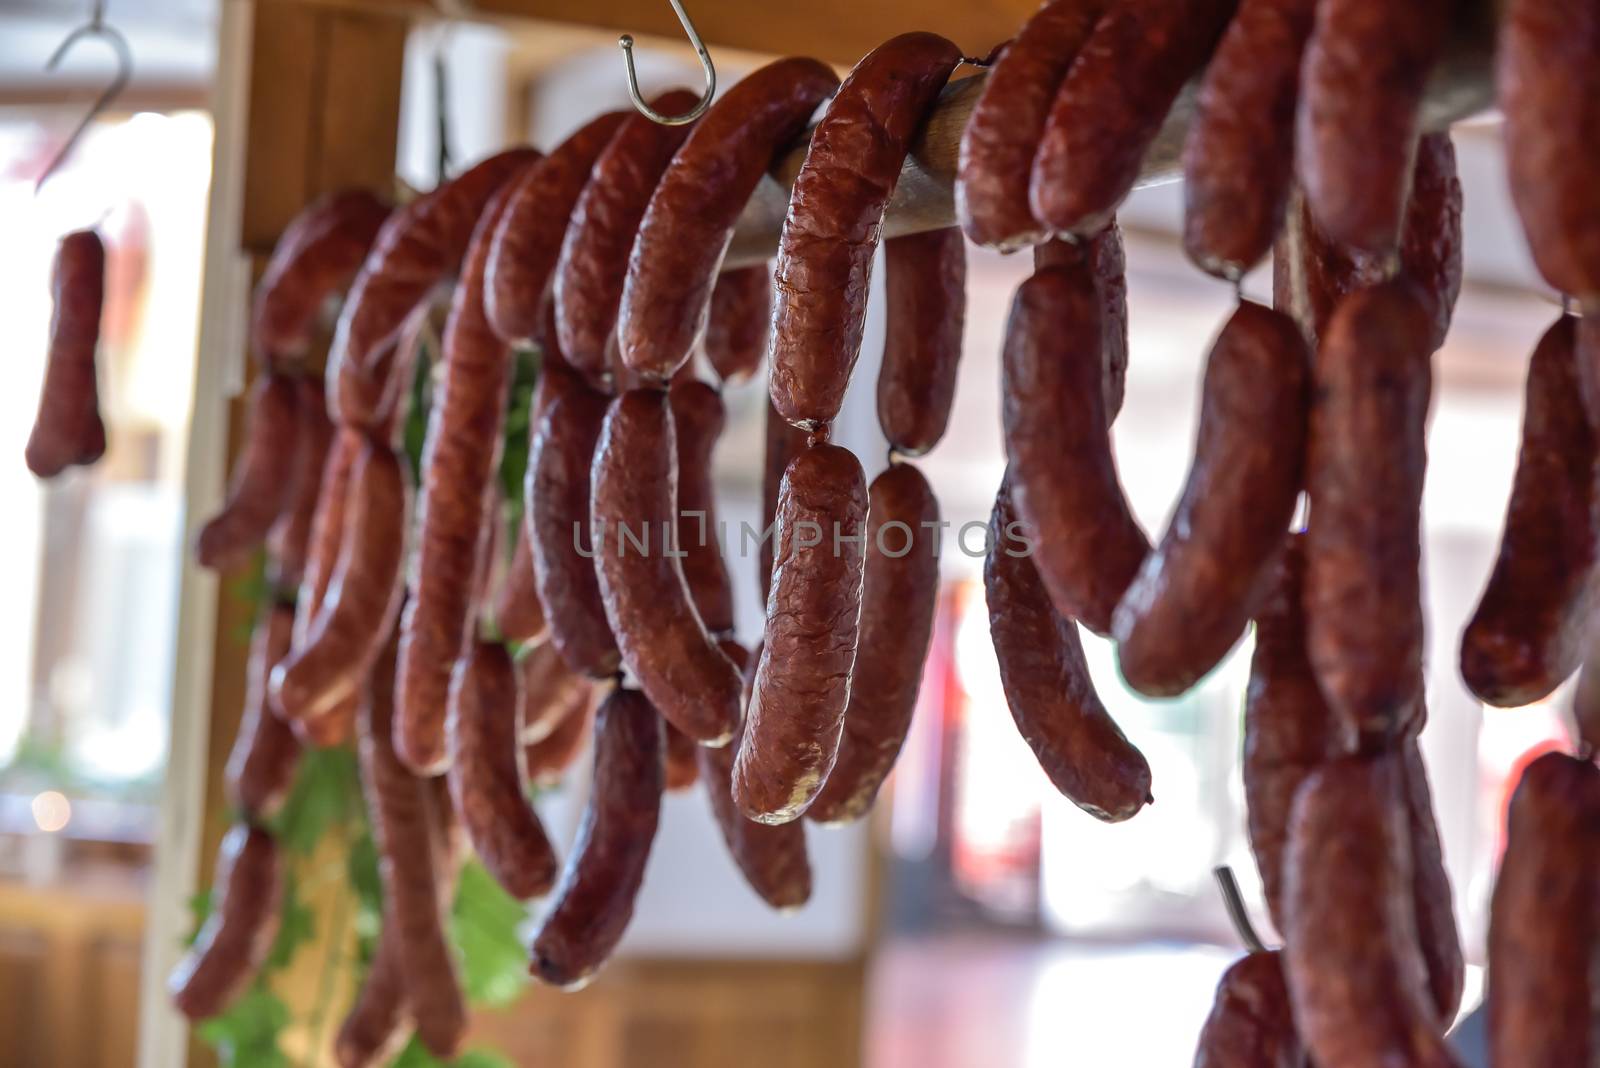 Country table with many kinds of ham and sausage hanging down